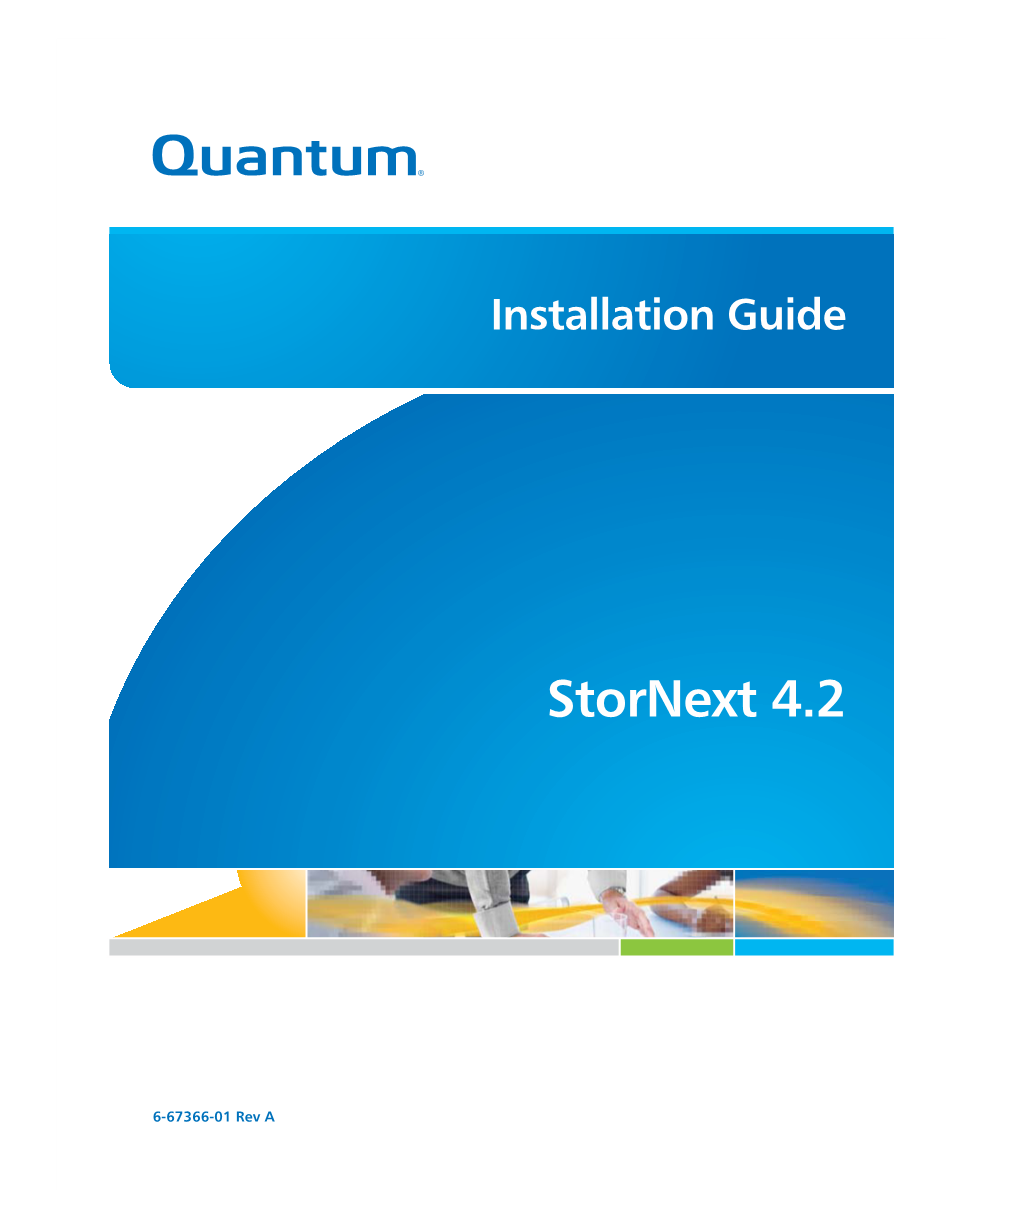 Stornext 4.2 Installation Guide, 6-67366-01, Rev A, September 2011, Product of USA